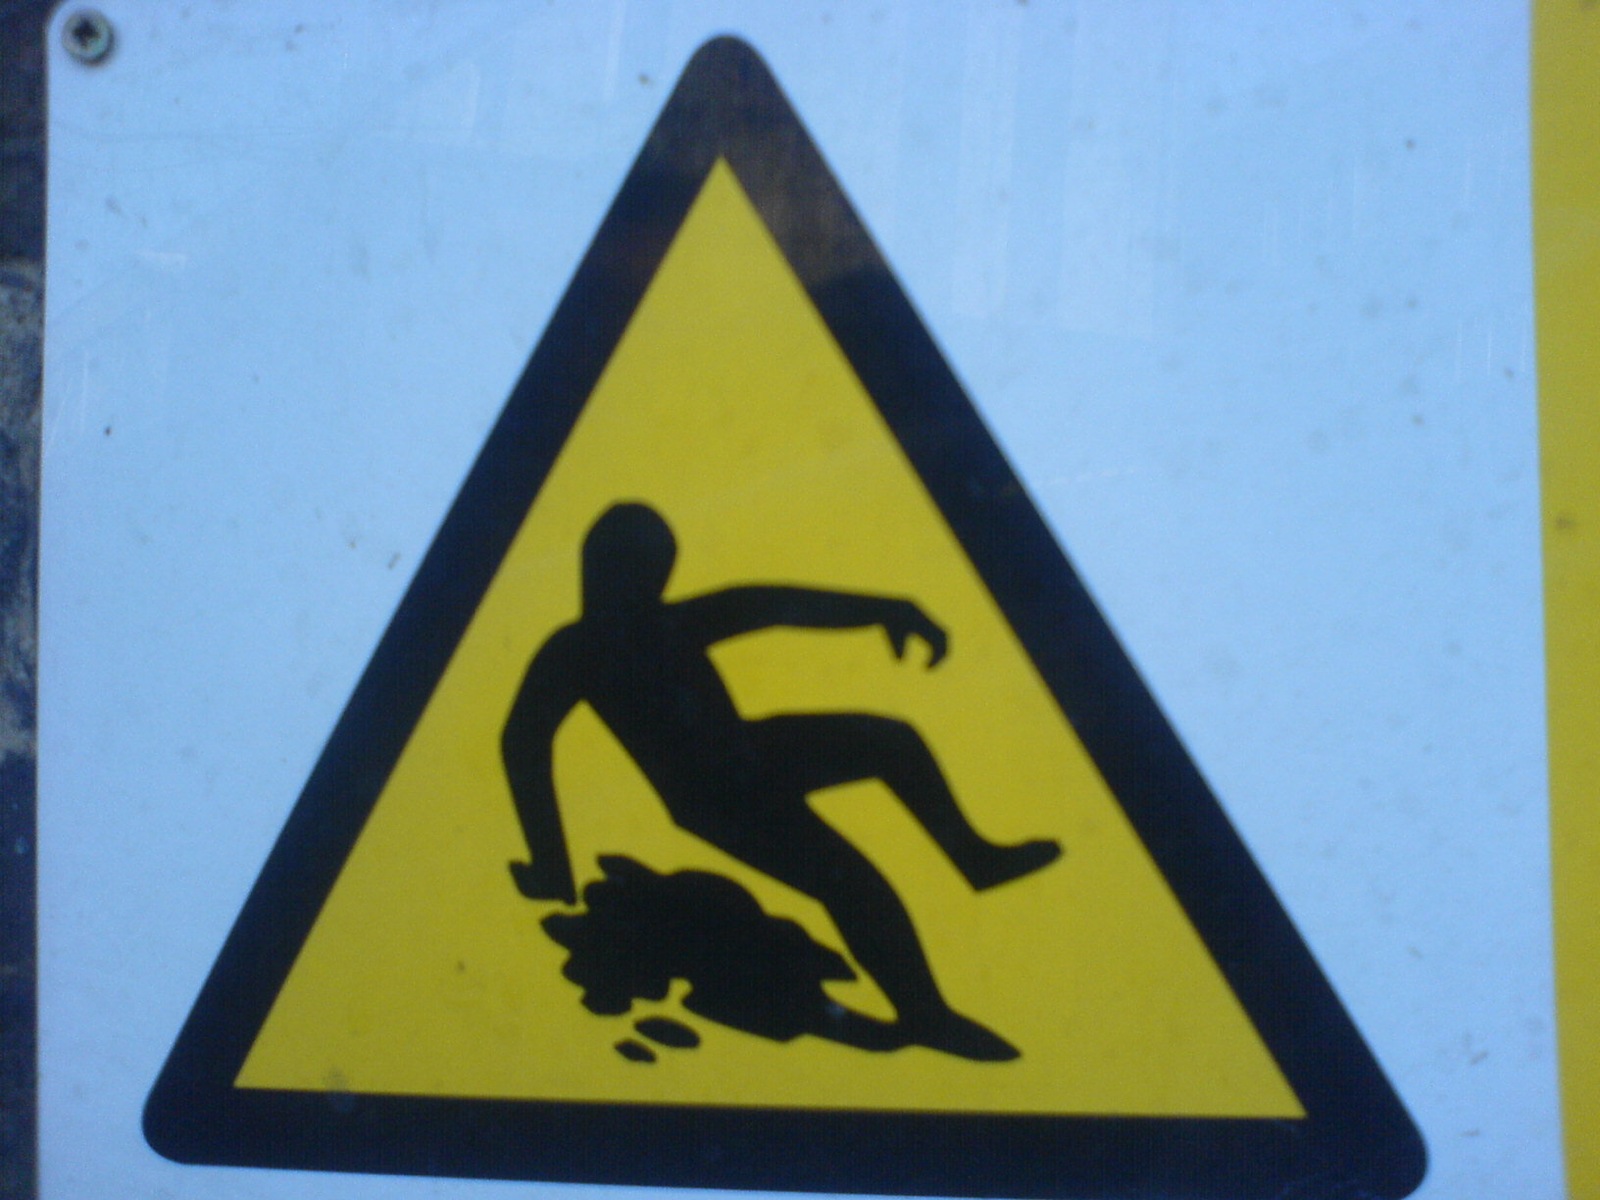 there is a sign showing an upside down picture of a man